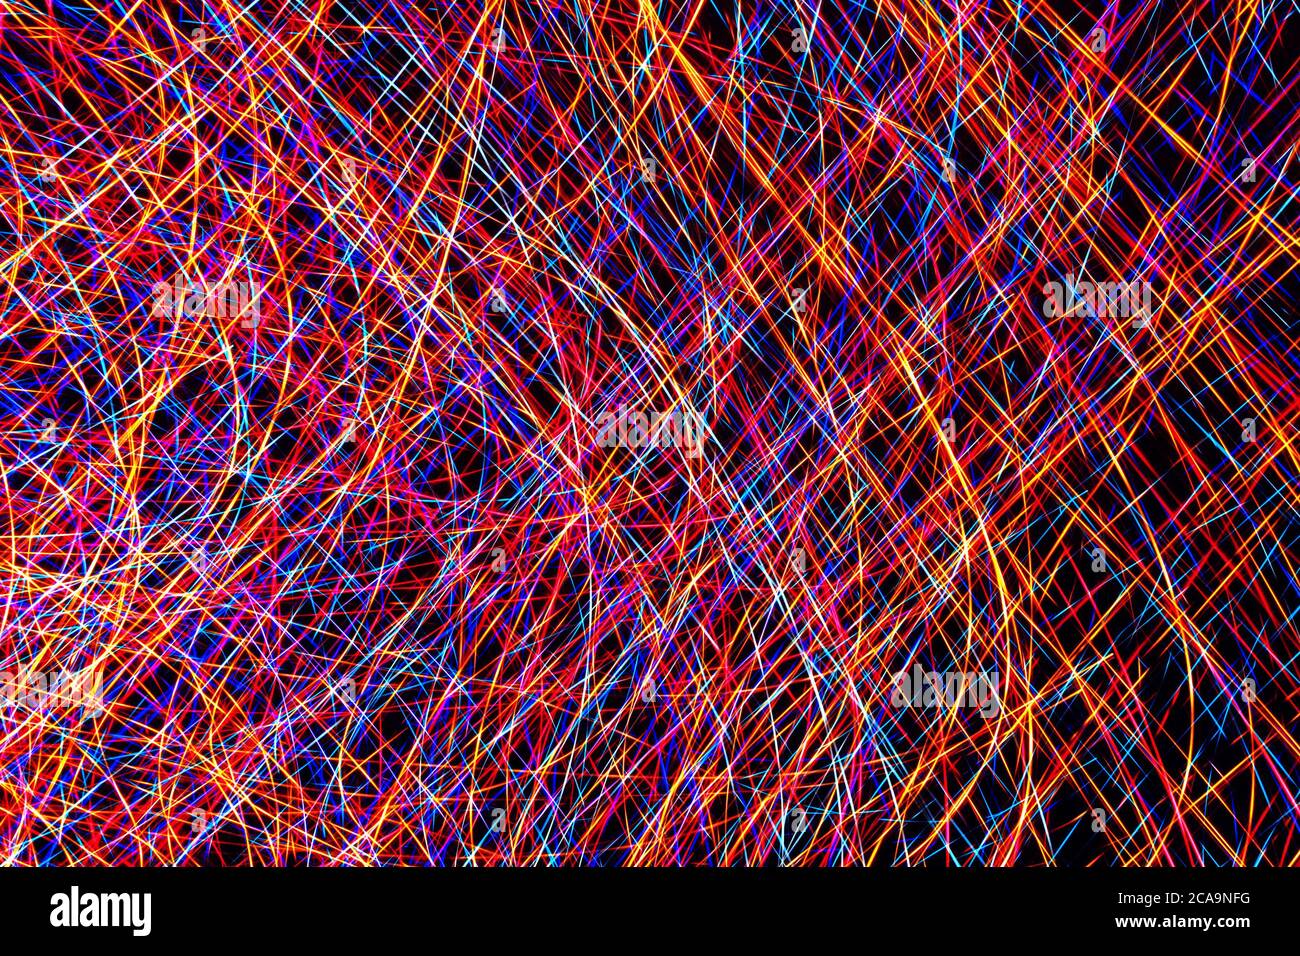 Colorful light painting abstract long exposure image with pink, blue, red and yellow lines on a black background Stock Photo